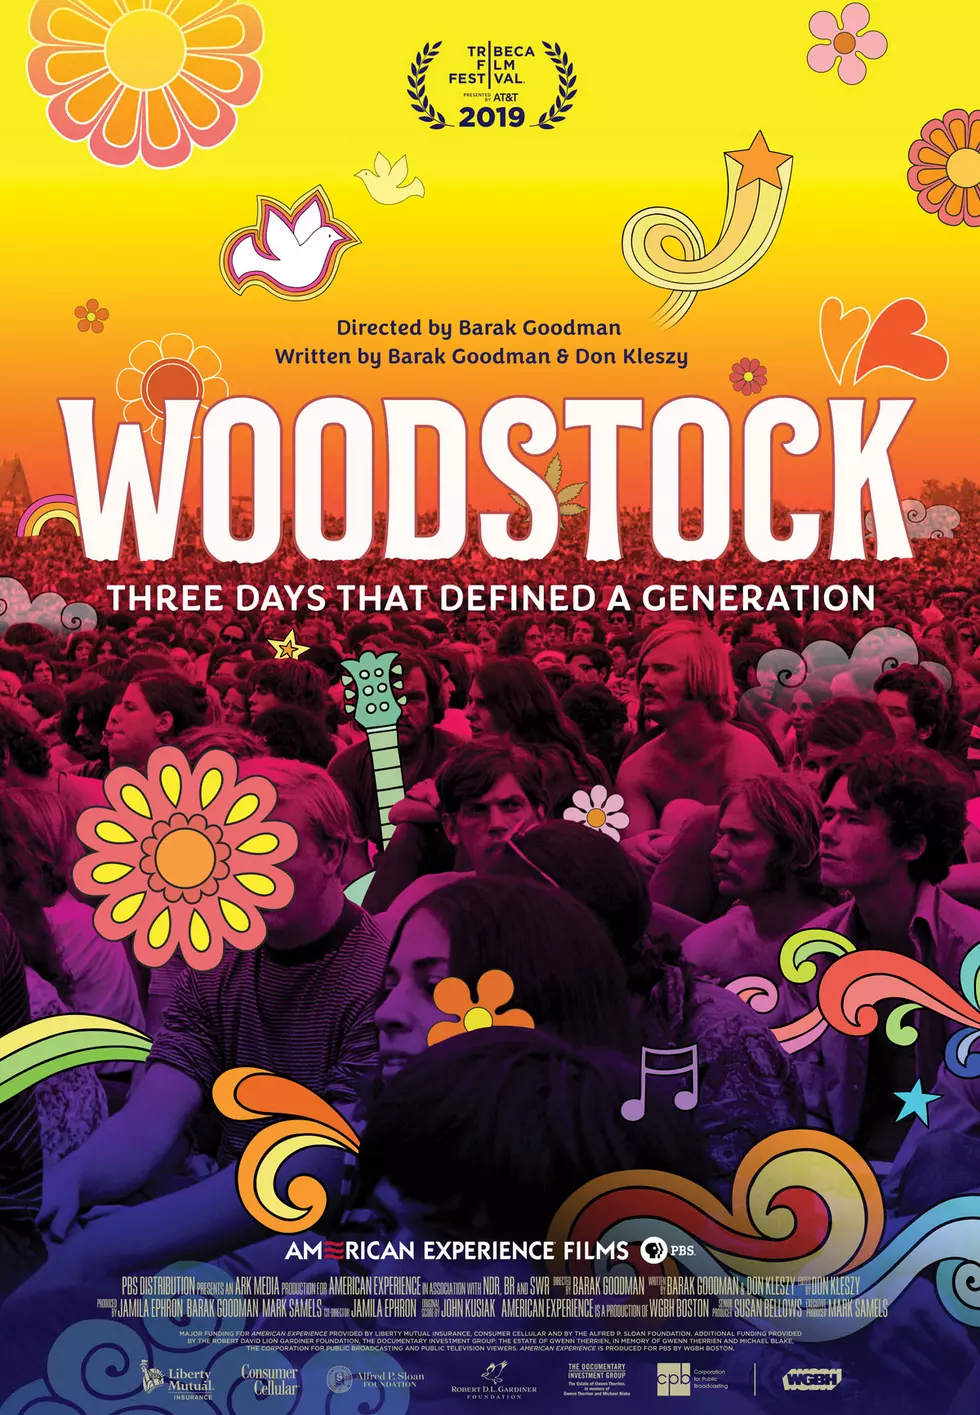 Watch the Trailer for new WOODSTOCK Documentary